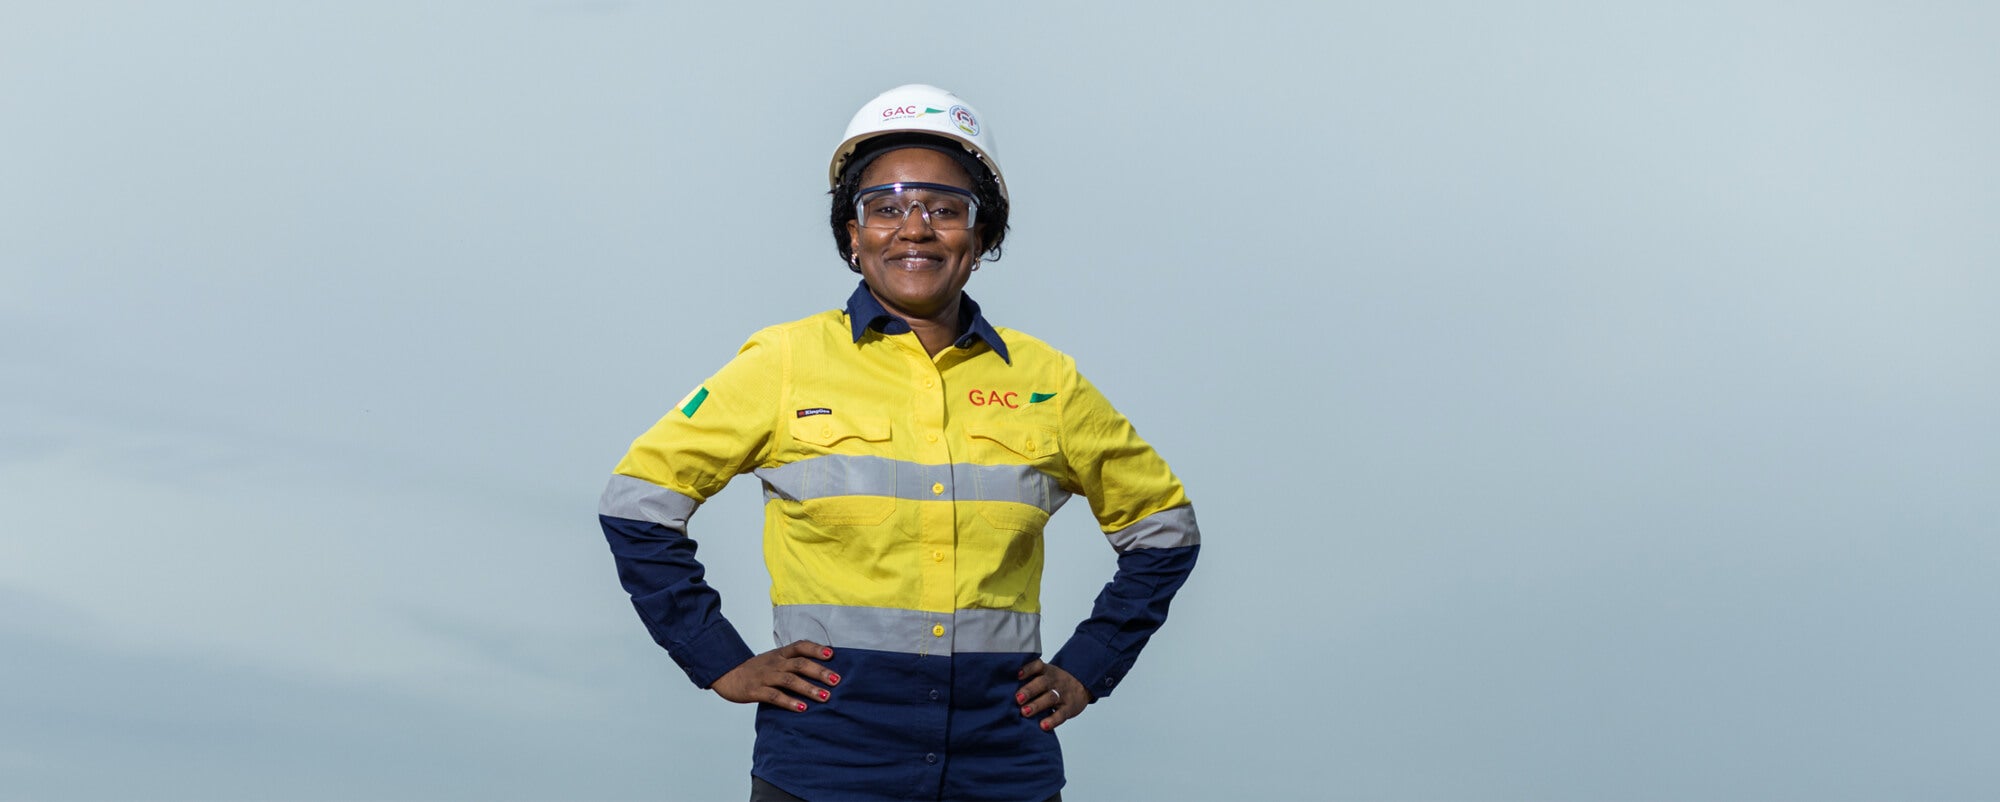 Profile Aissata Beavogui with a hardhat and her company uniform